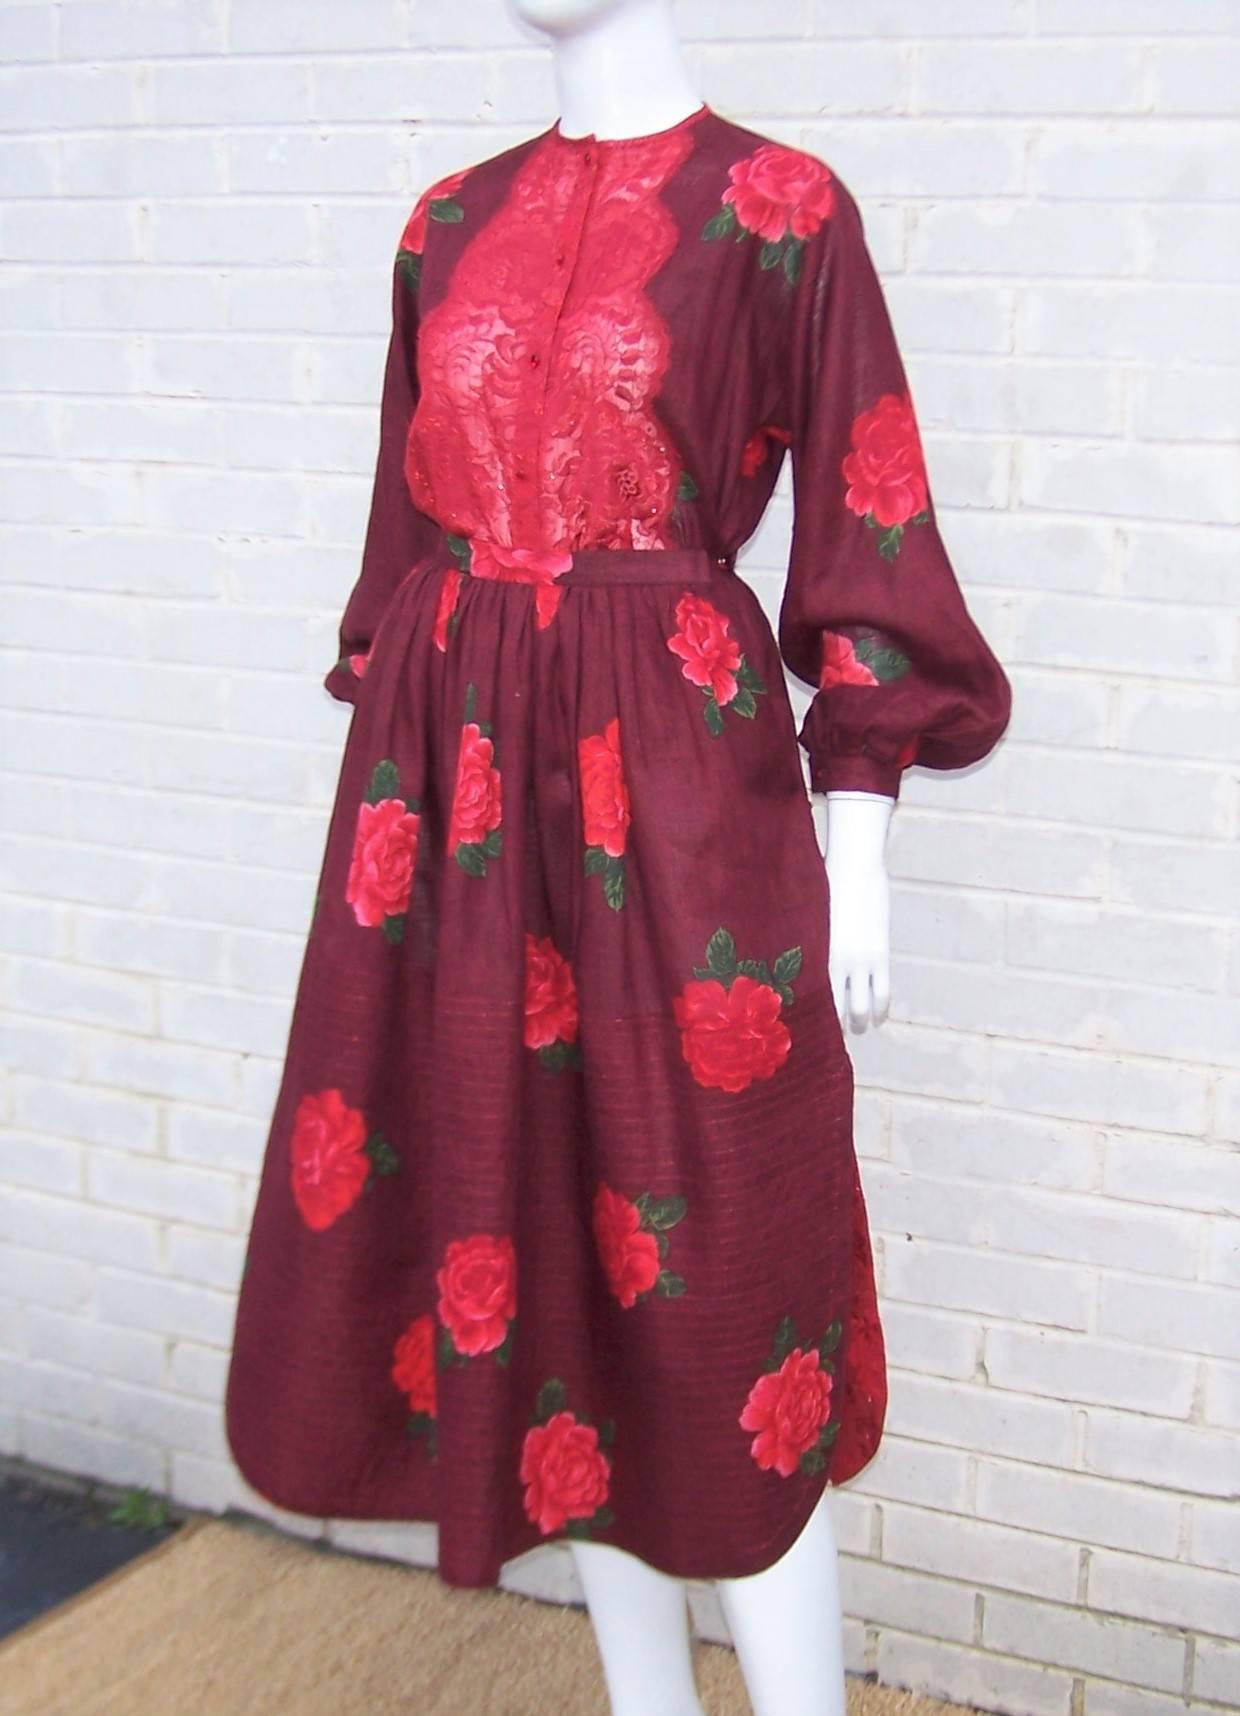 Wearing this 1970's Geoffrey Beene two piece ensemble is akin to walking in a rose garden.  The gorgeous burgundy linen fabric is printed with red roses highlighted with pink and green.  The peasant style top closes at the front with ruby red